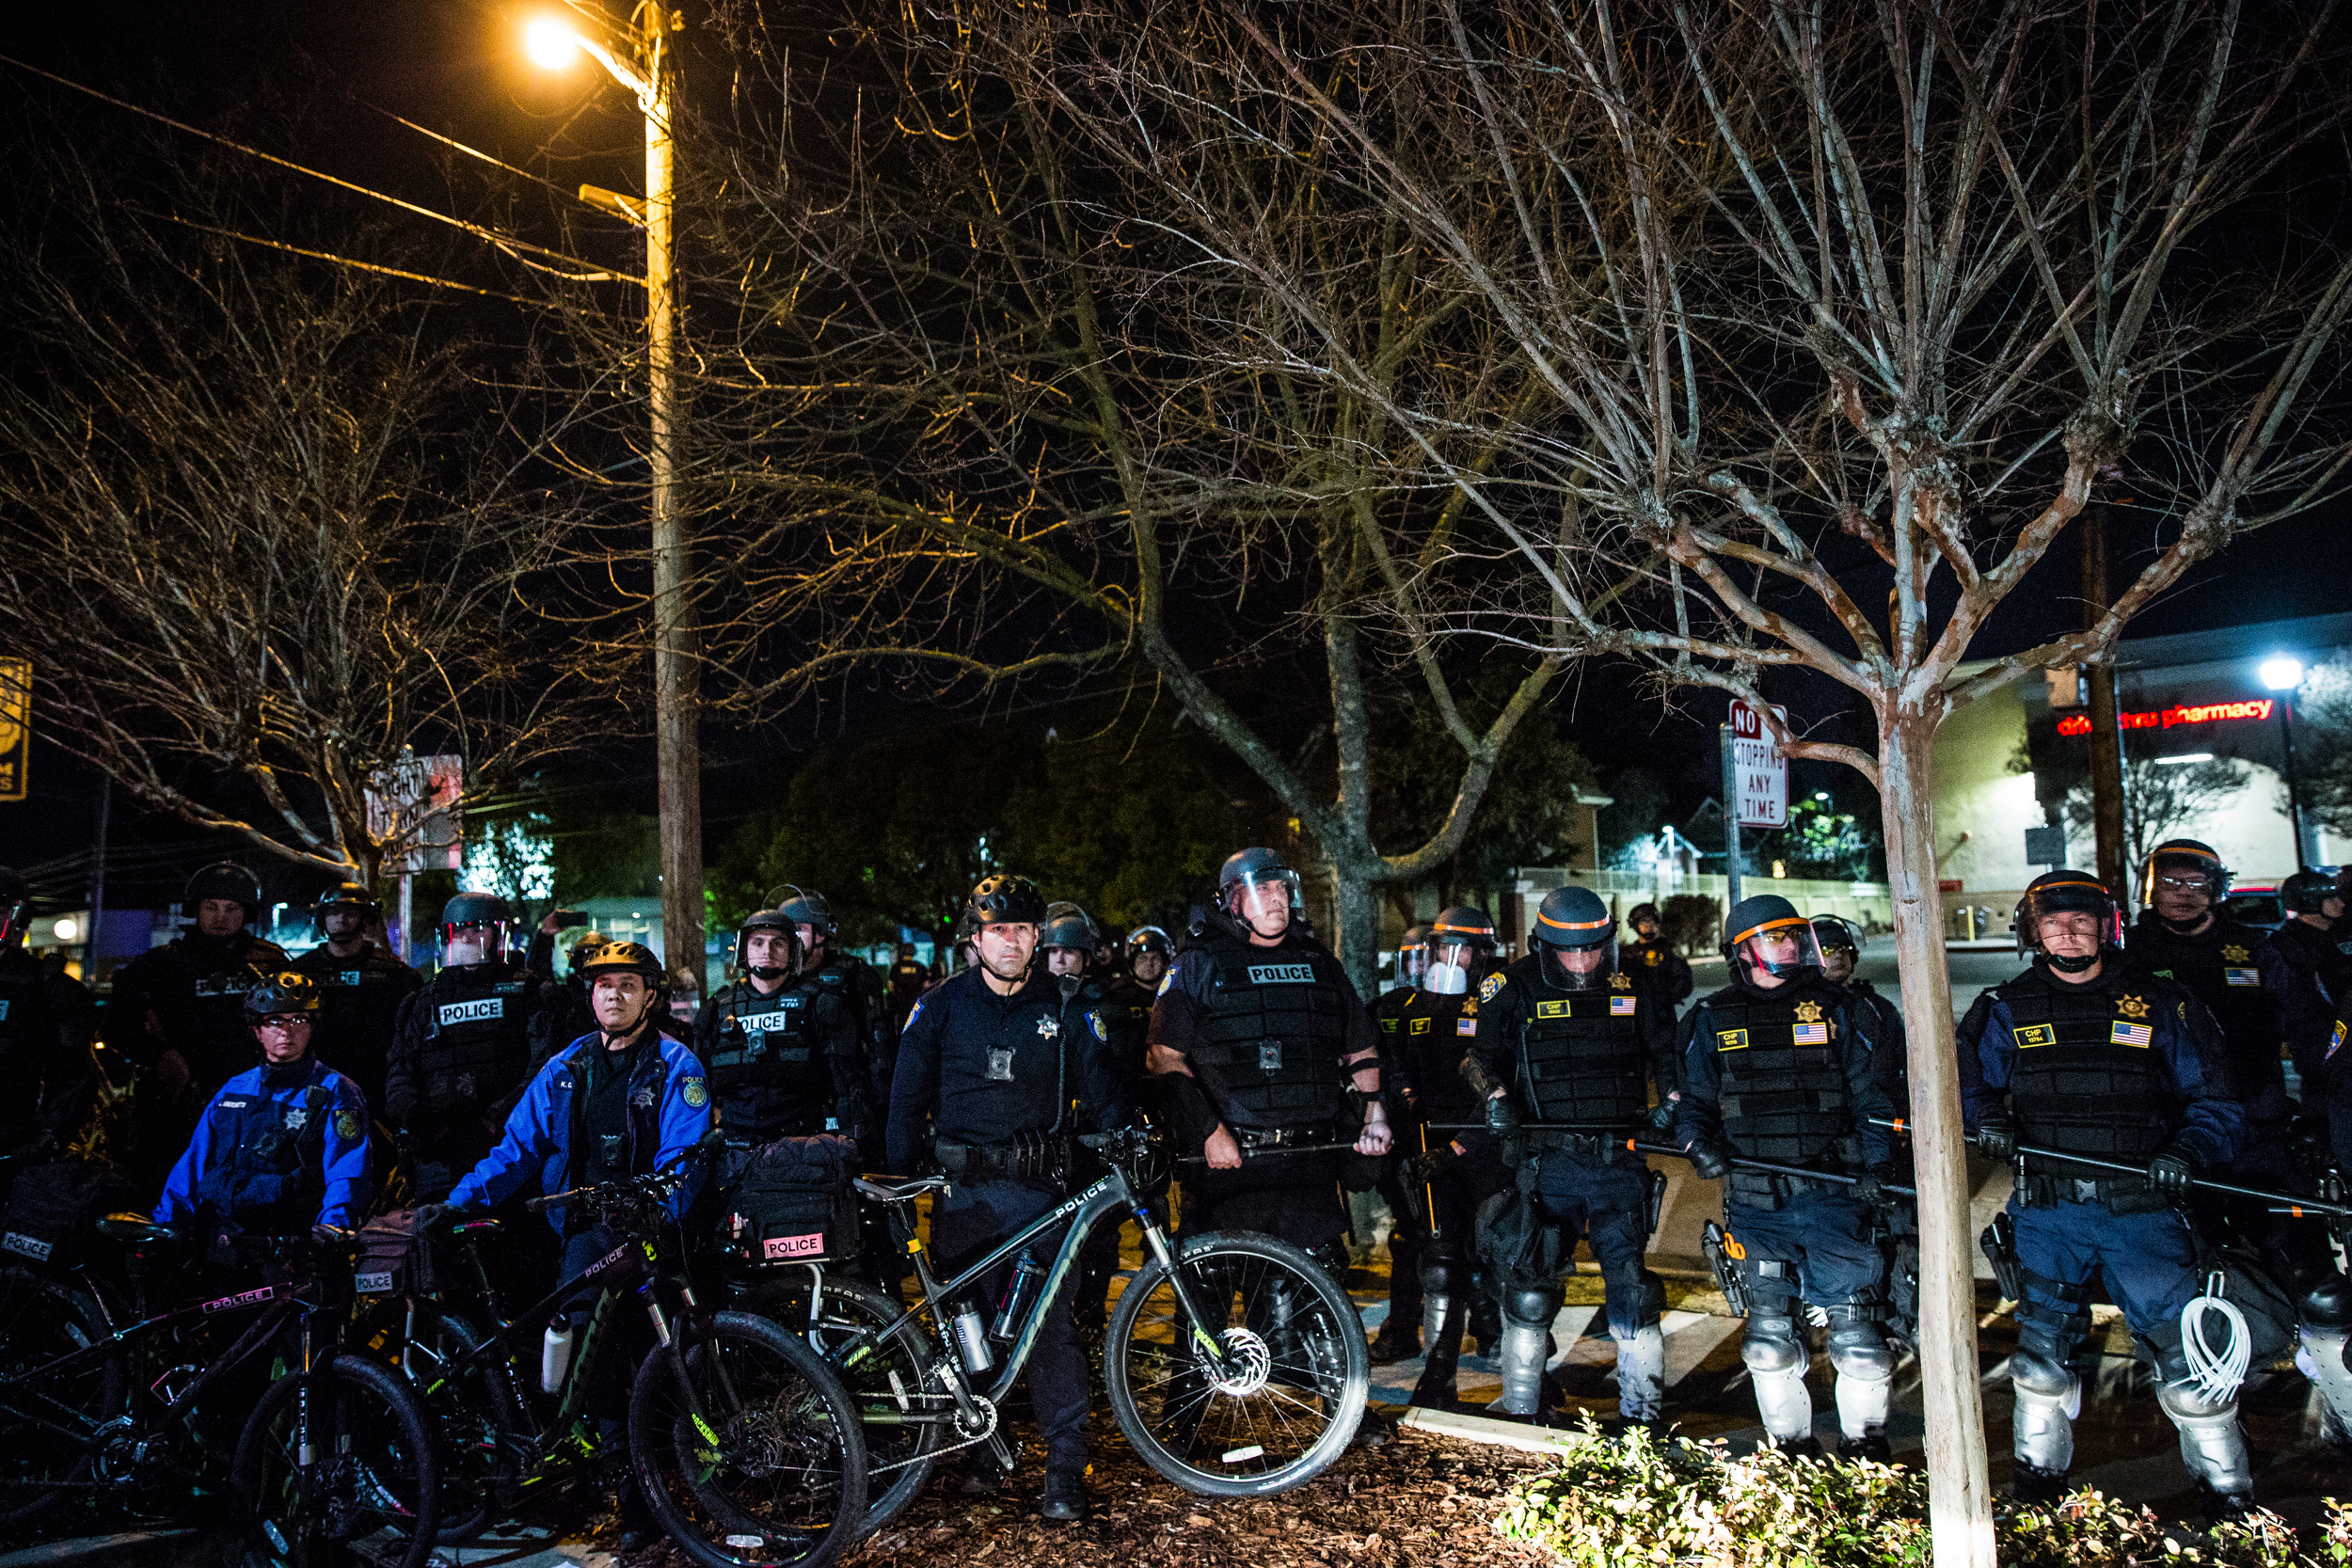  Police advance on peaceful protestors in the wealthy East Sacramento neighborhood known as the "Fab Forties" to protest the Sacramento County District Attorney's decision to not charge the officers who shot an unarmed Clark in 2018. Sacramento Polic